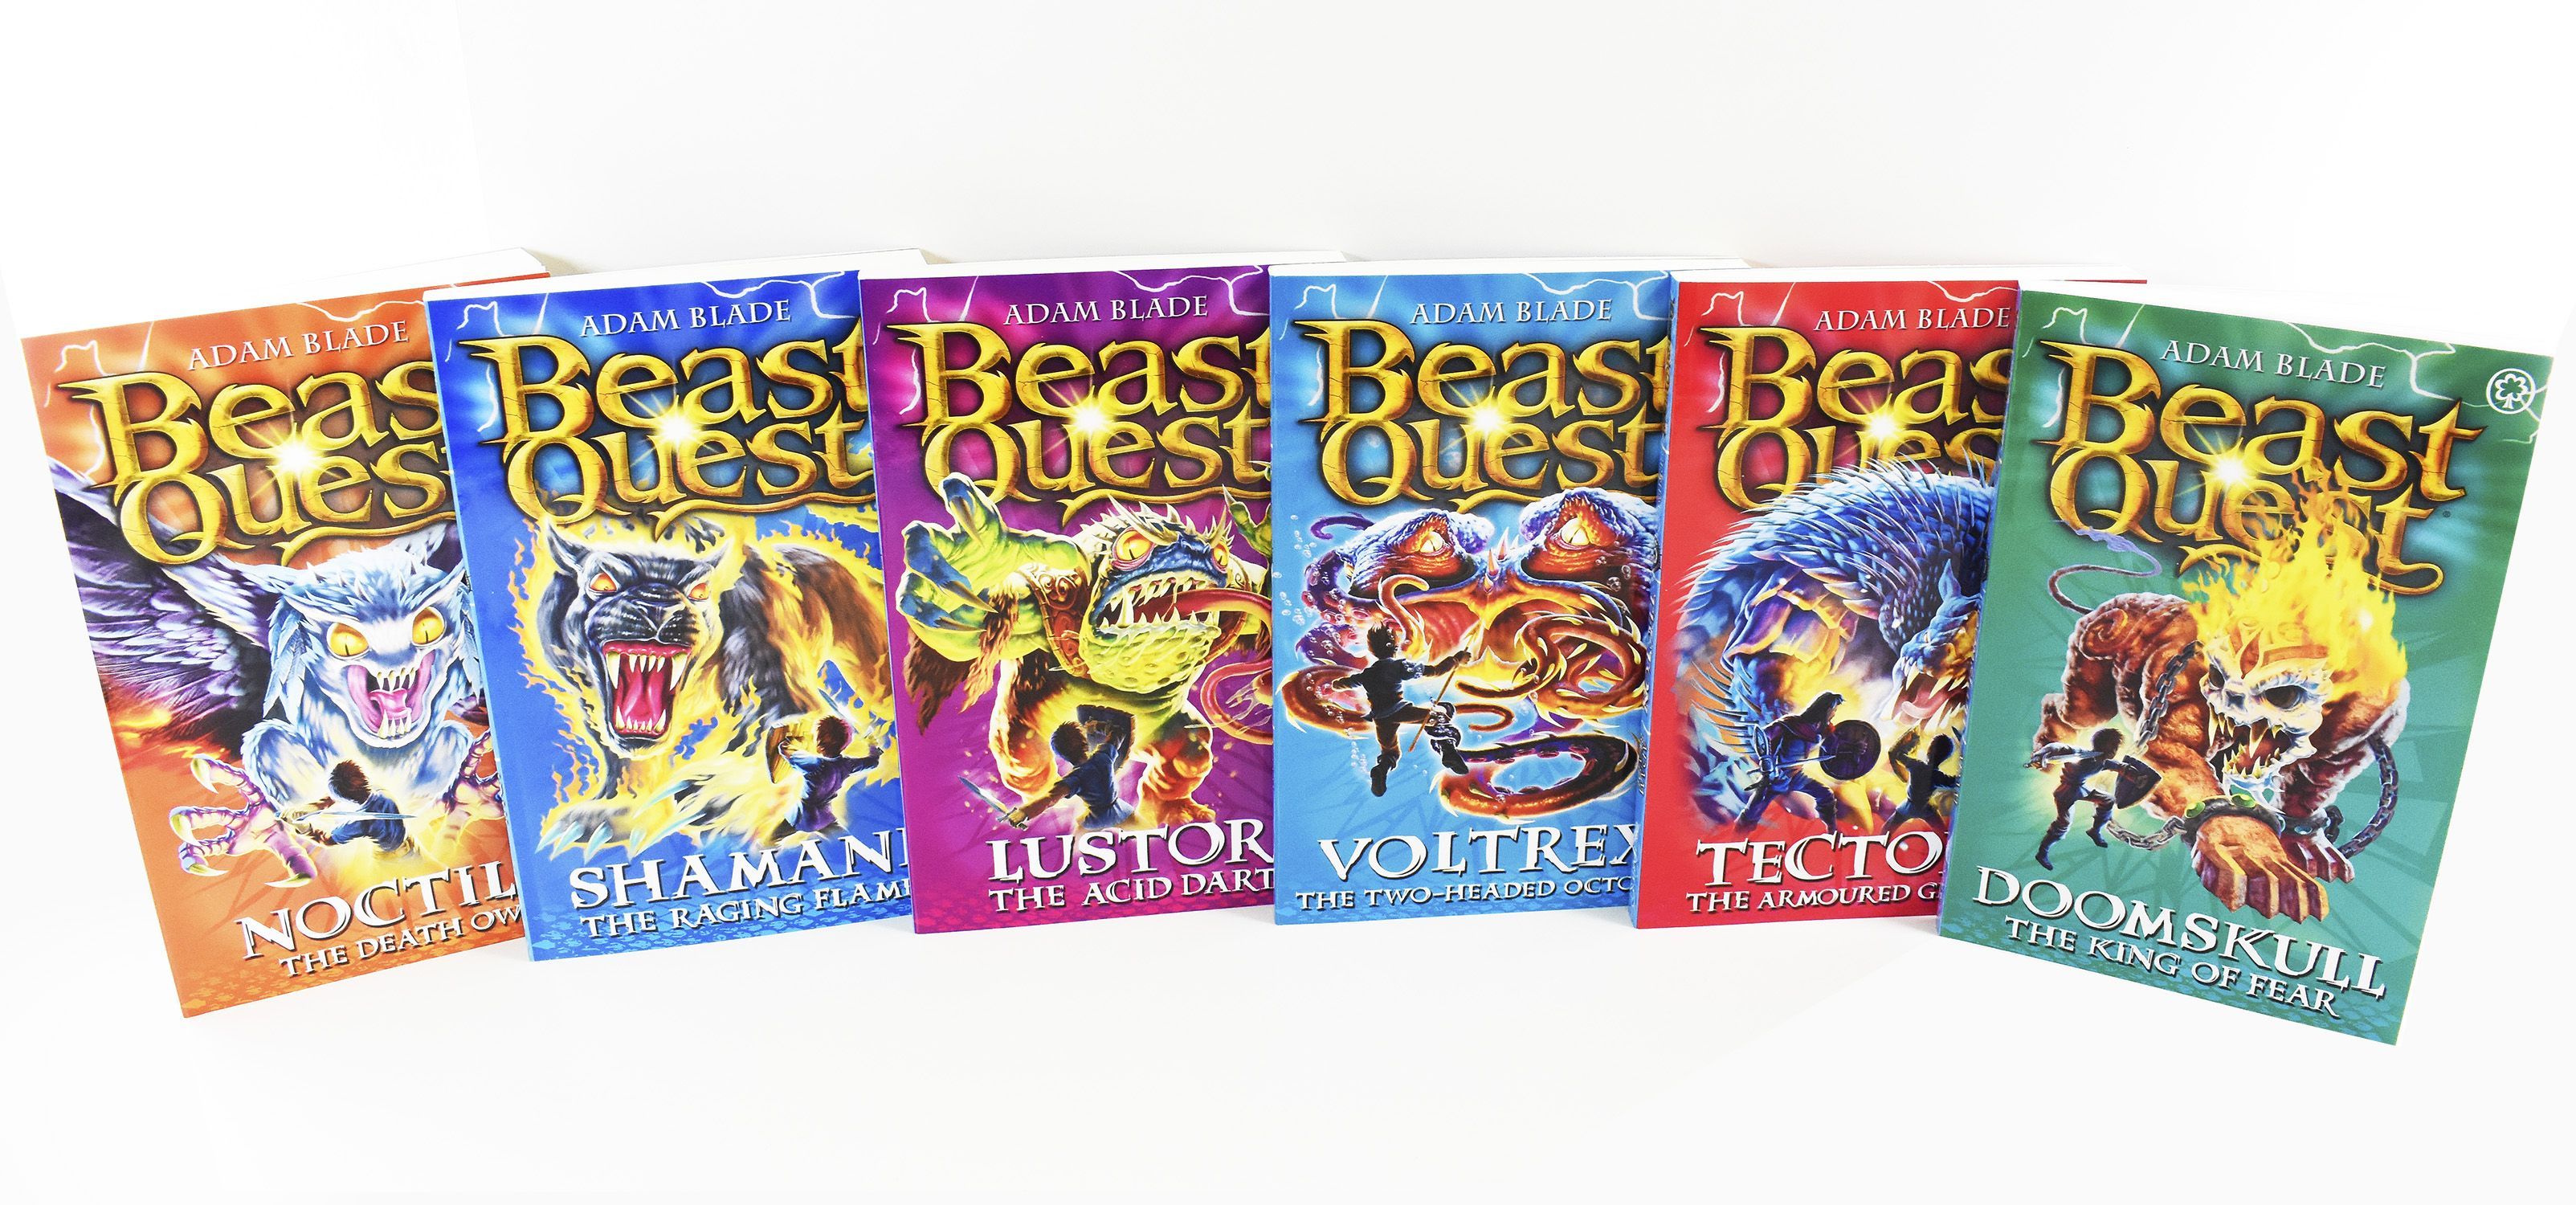 Beast Quest 6 Books Series 10 Children Collection Paperback Box Set By Adam Blade - St Stephens Books